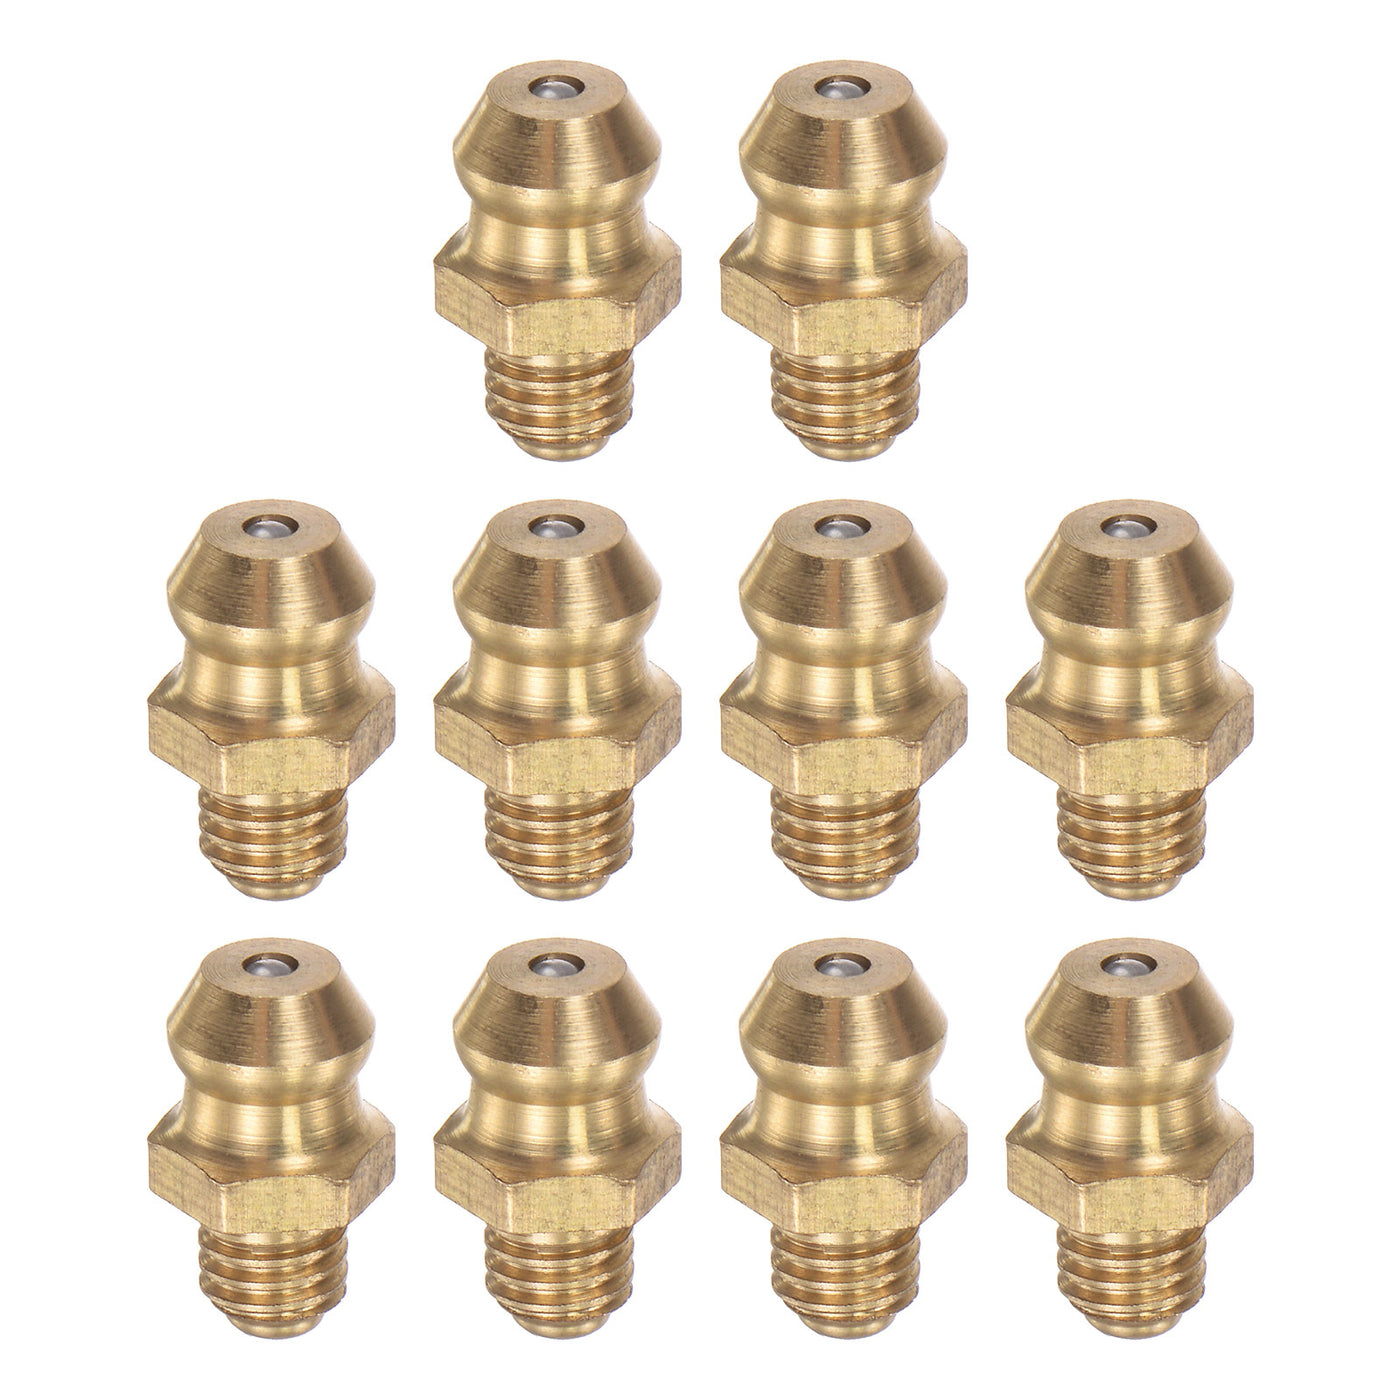 uxcell Uxcell Brass Straight Hydraulic Grease Fitting Accessories M5 x 0.8mm Thread, 10Pcs